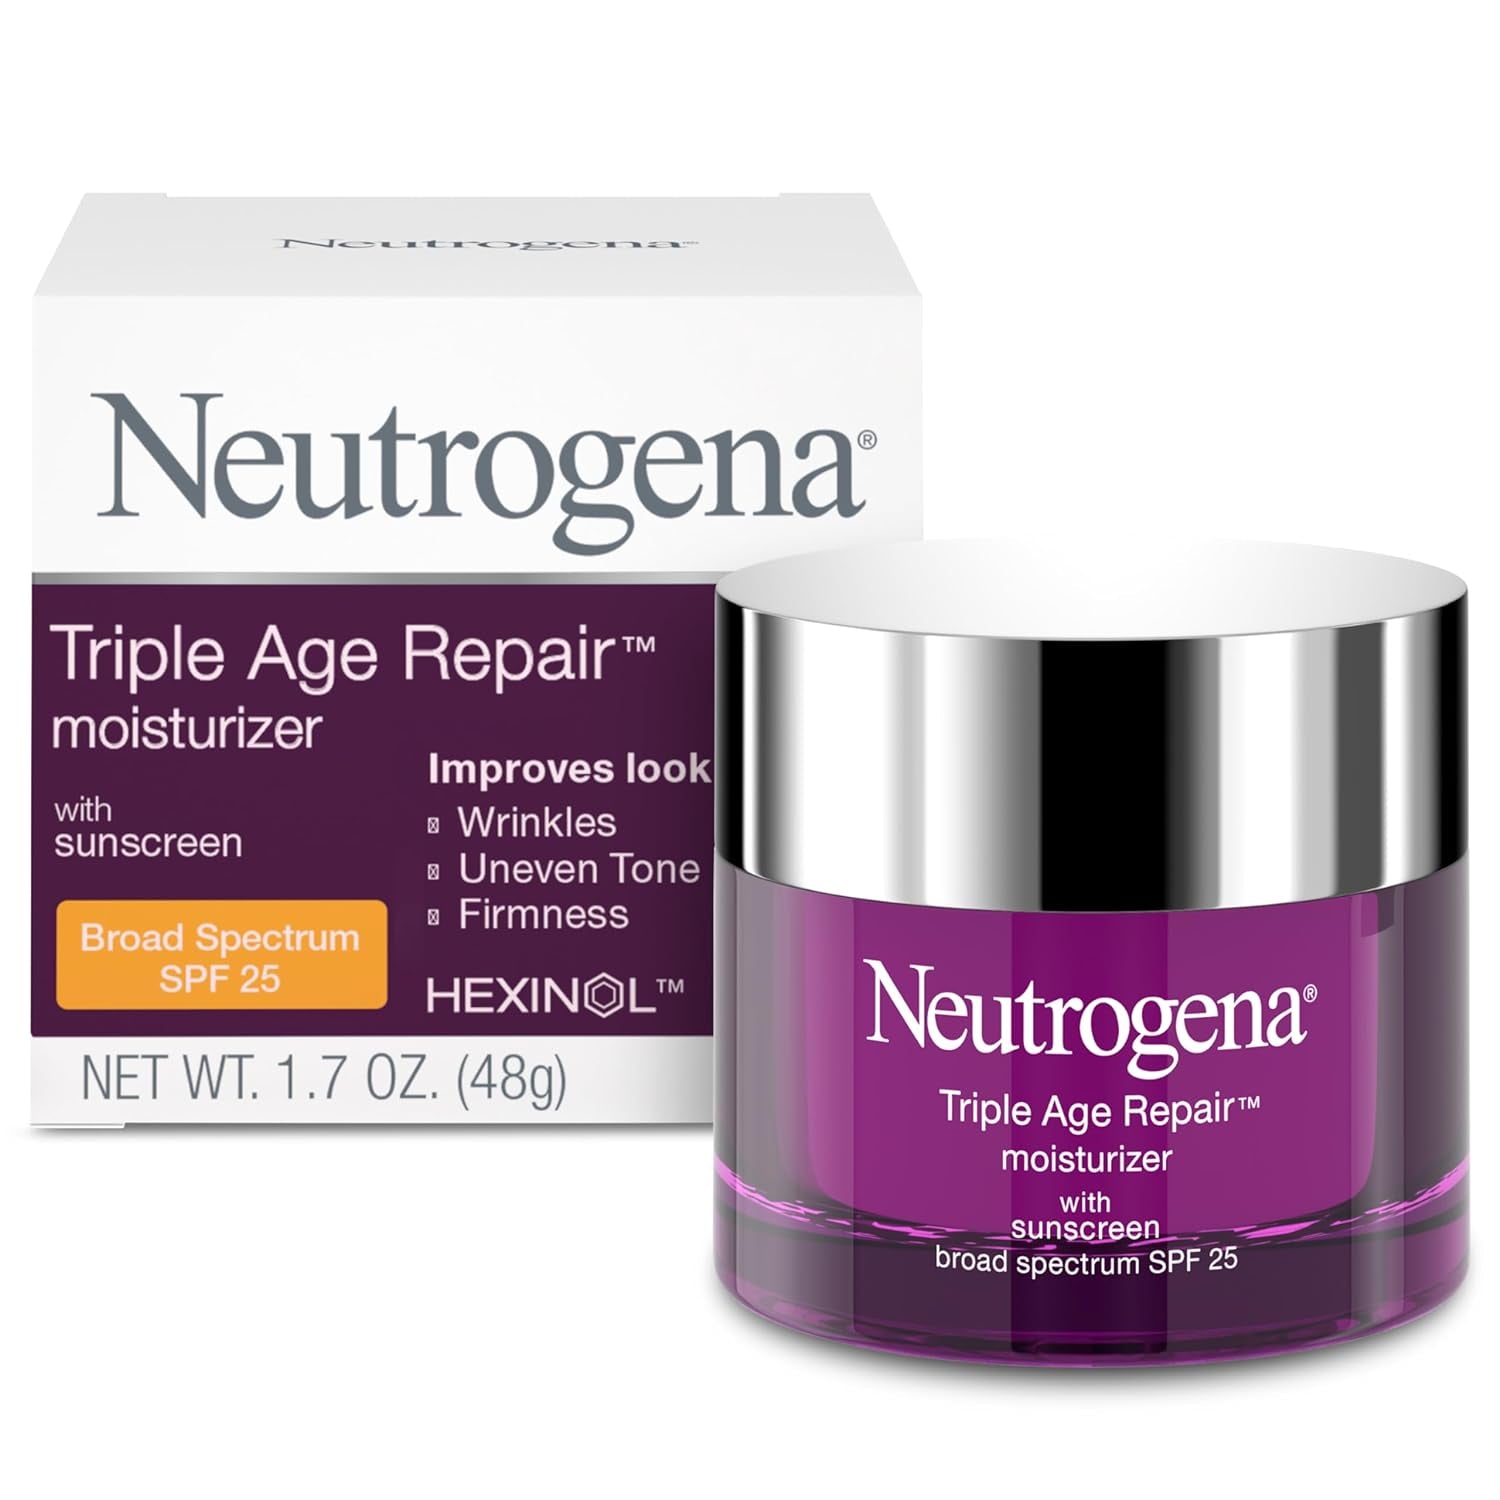 Triple Age Repair Anti-Aging Daily Facial Moisturizer with SPF 25 Sunscreen & Vitamin C, Firming Anti-Wrinkle Face & Neck Cream for Dark Spots, Glycerin & Shea Butter, 1.7 Oz